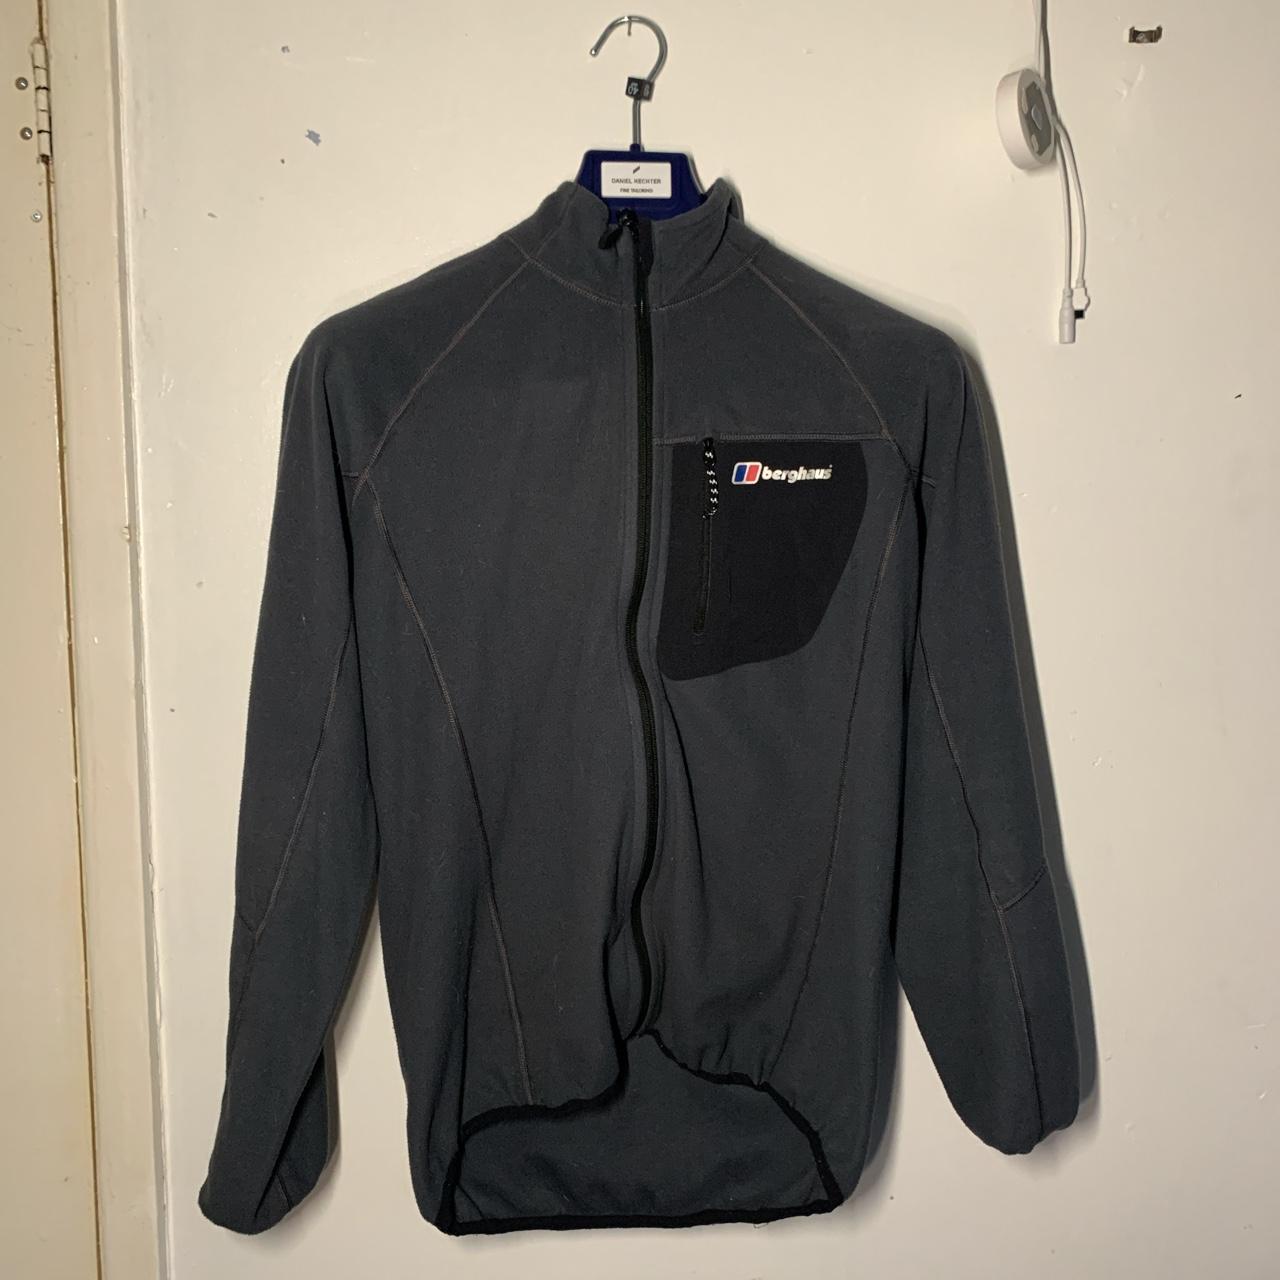 Berghaus Limited Edition Fleece pretty sure this is... - Depop